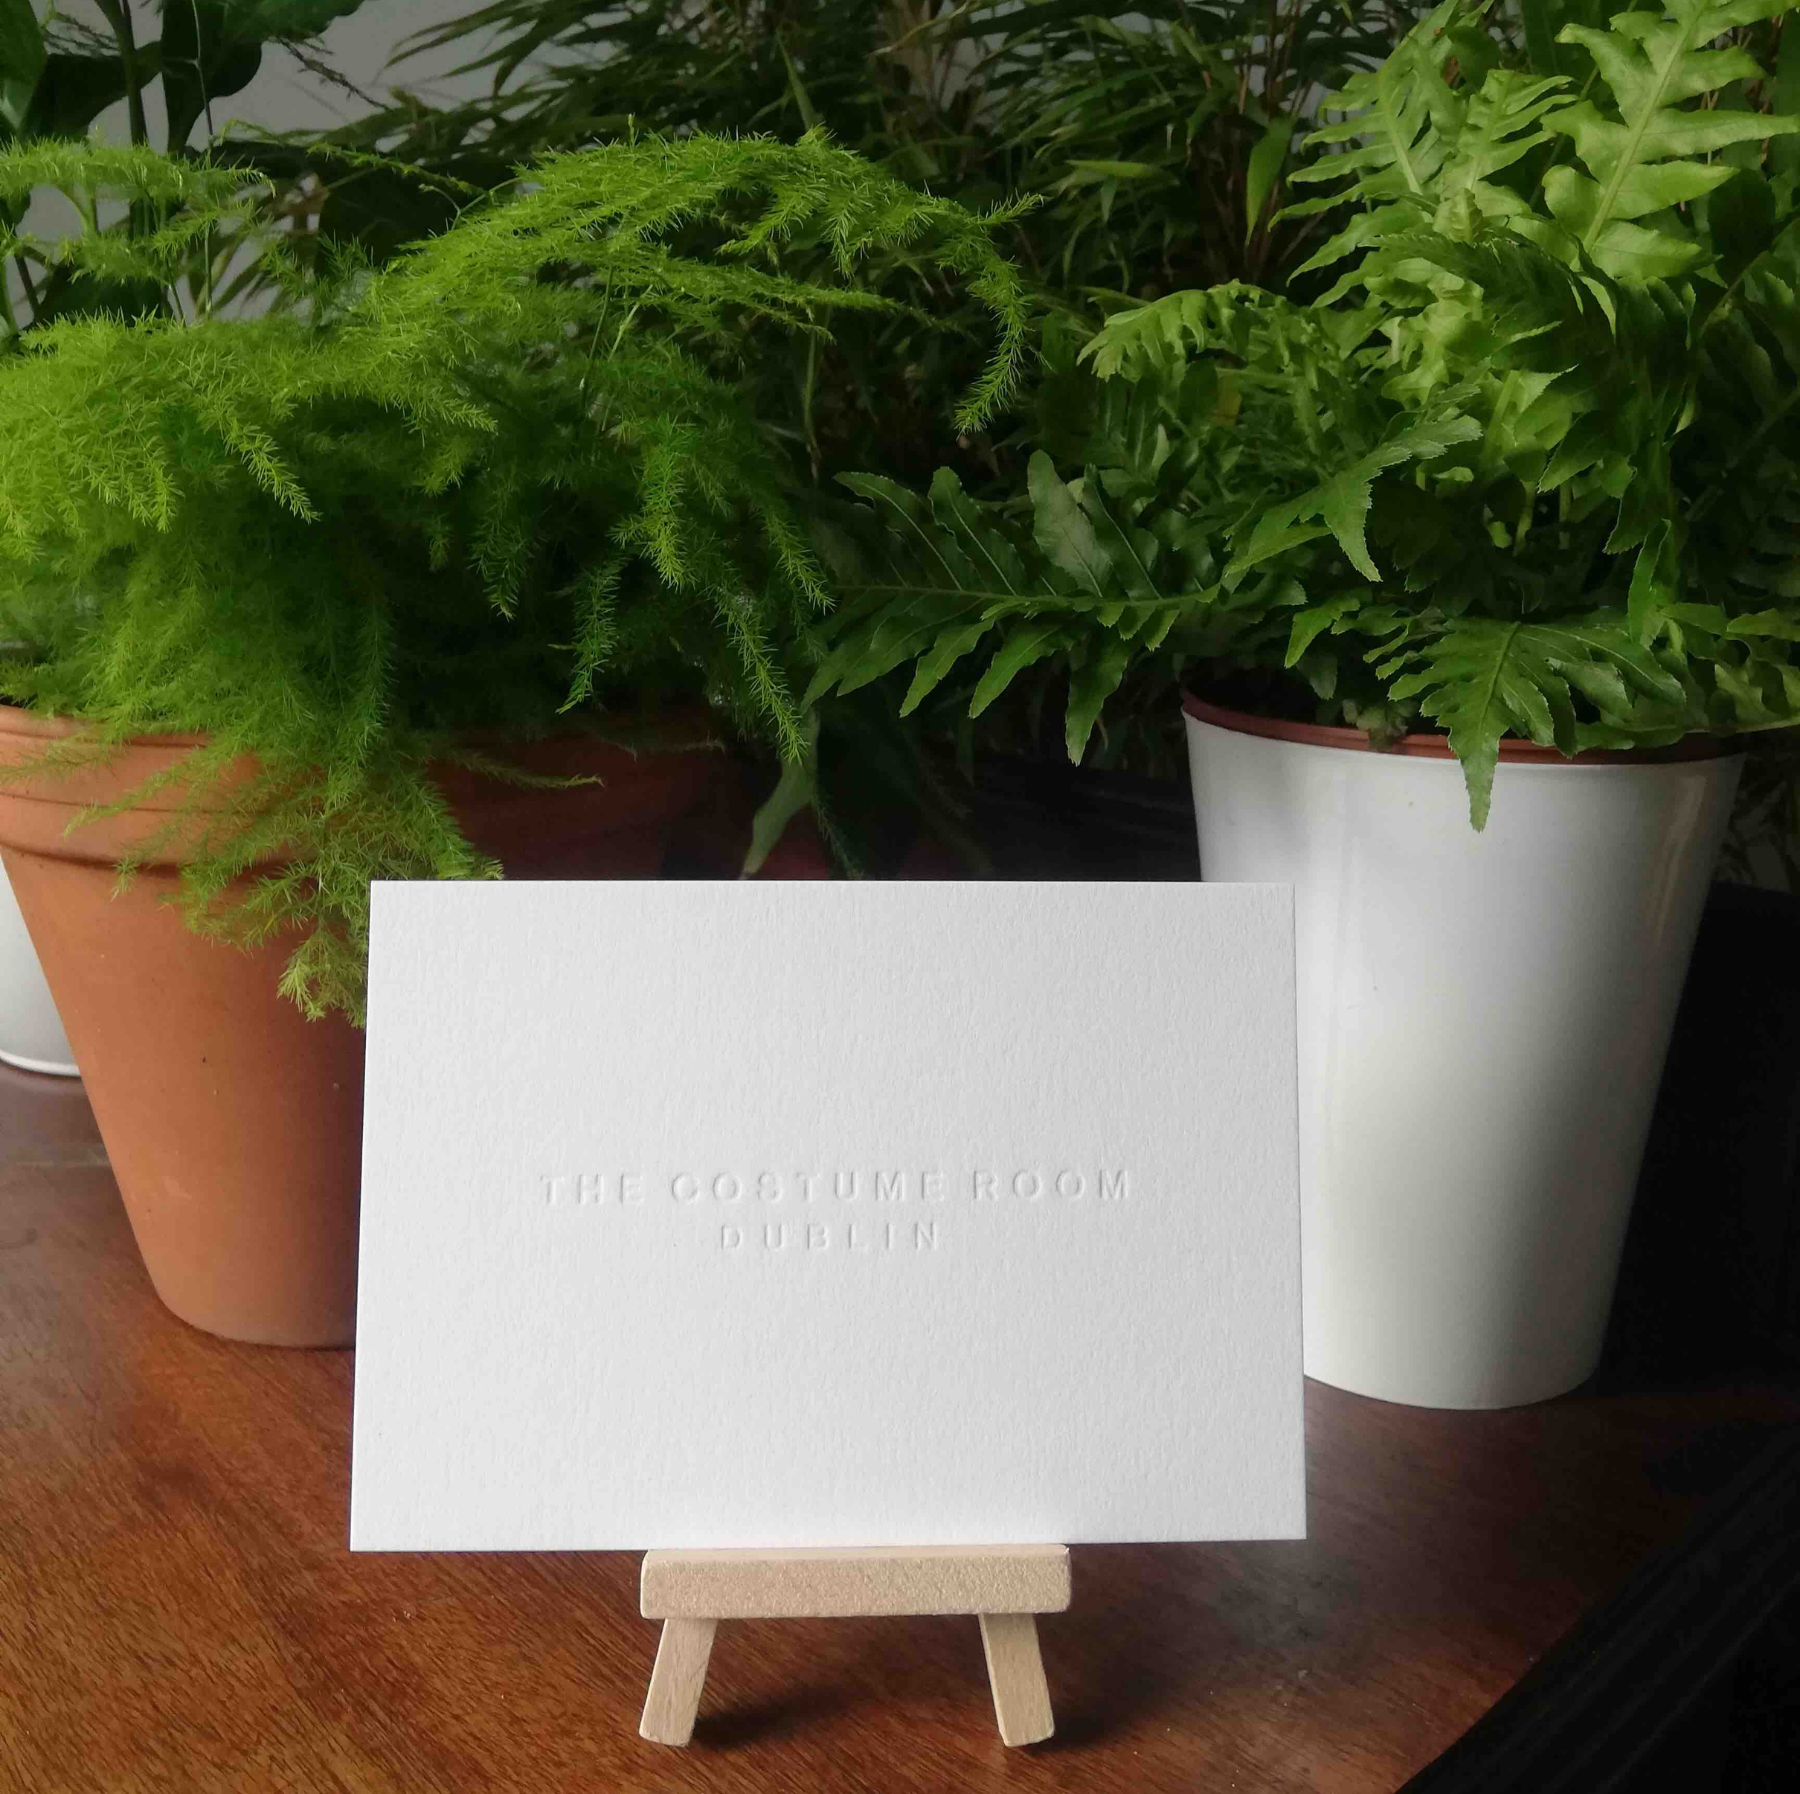 The Costume Room letterpress Gift Card arrives wrapped in a beautiful environmentally friendly box